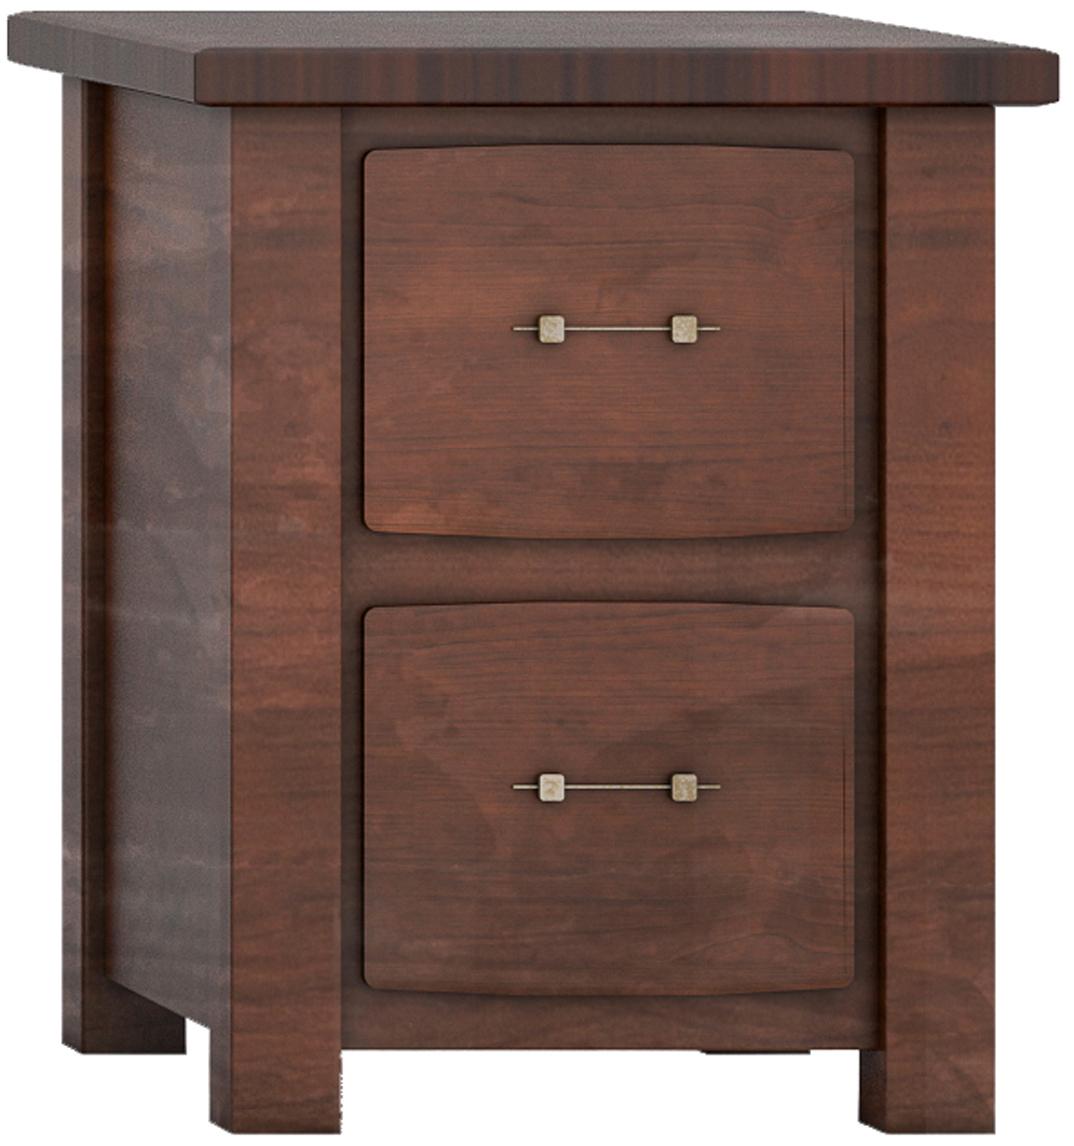 Barn Floor Office Collection Letter File Cabinet - 2 drawer